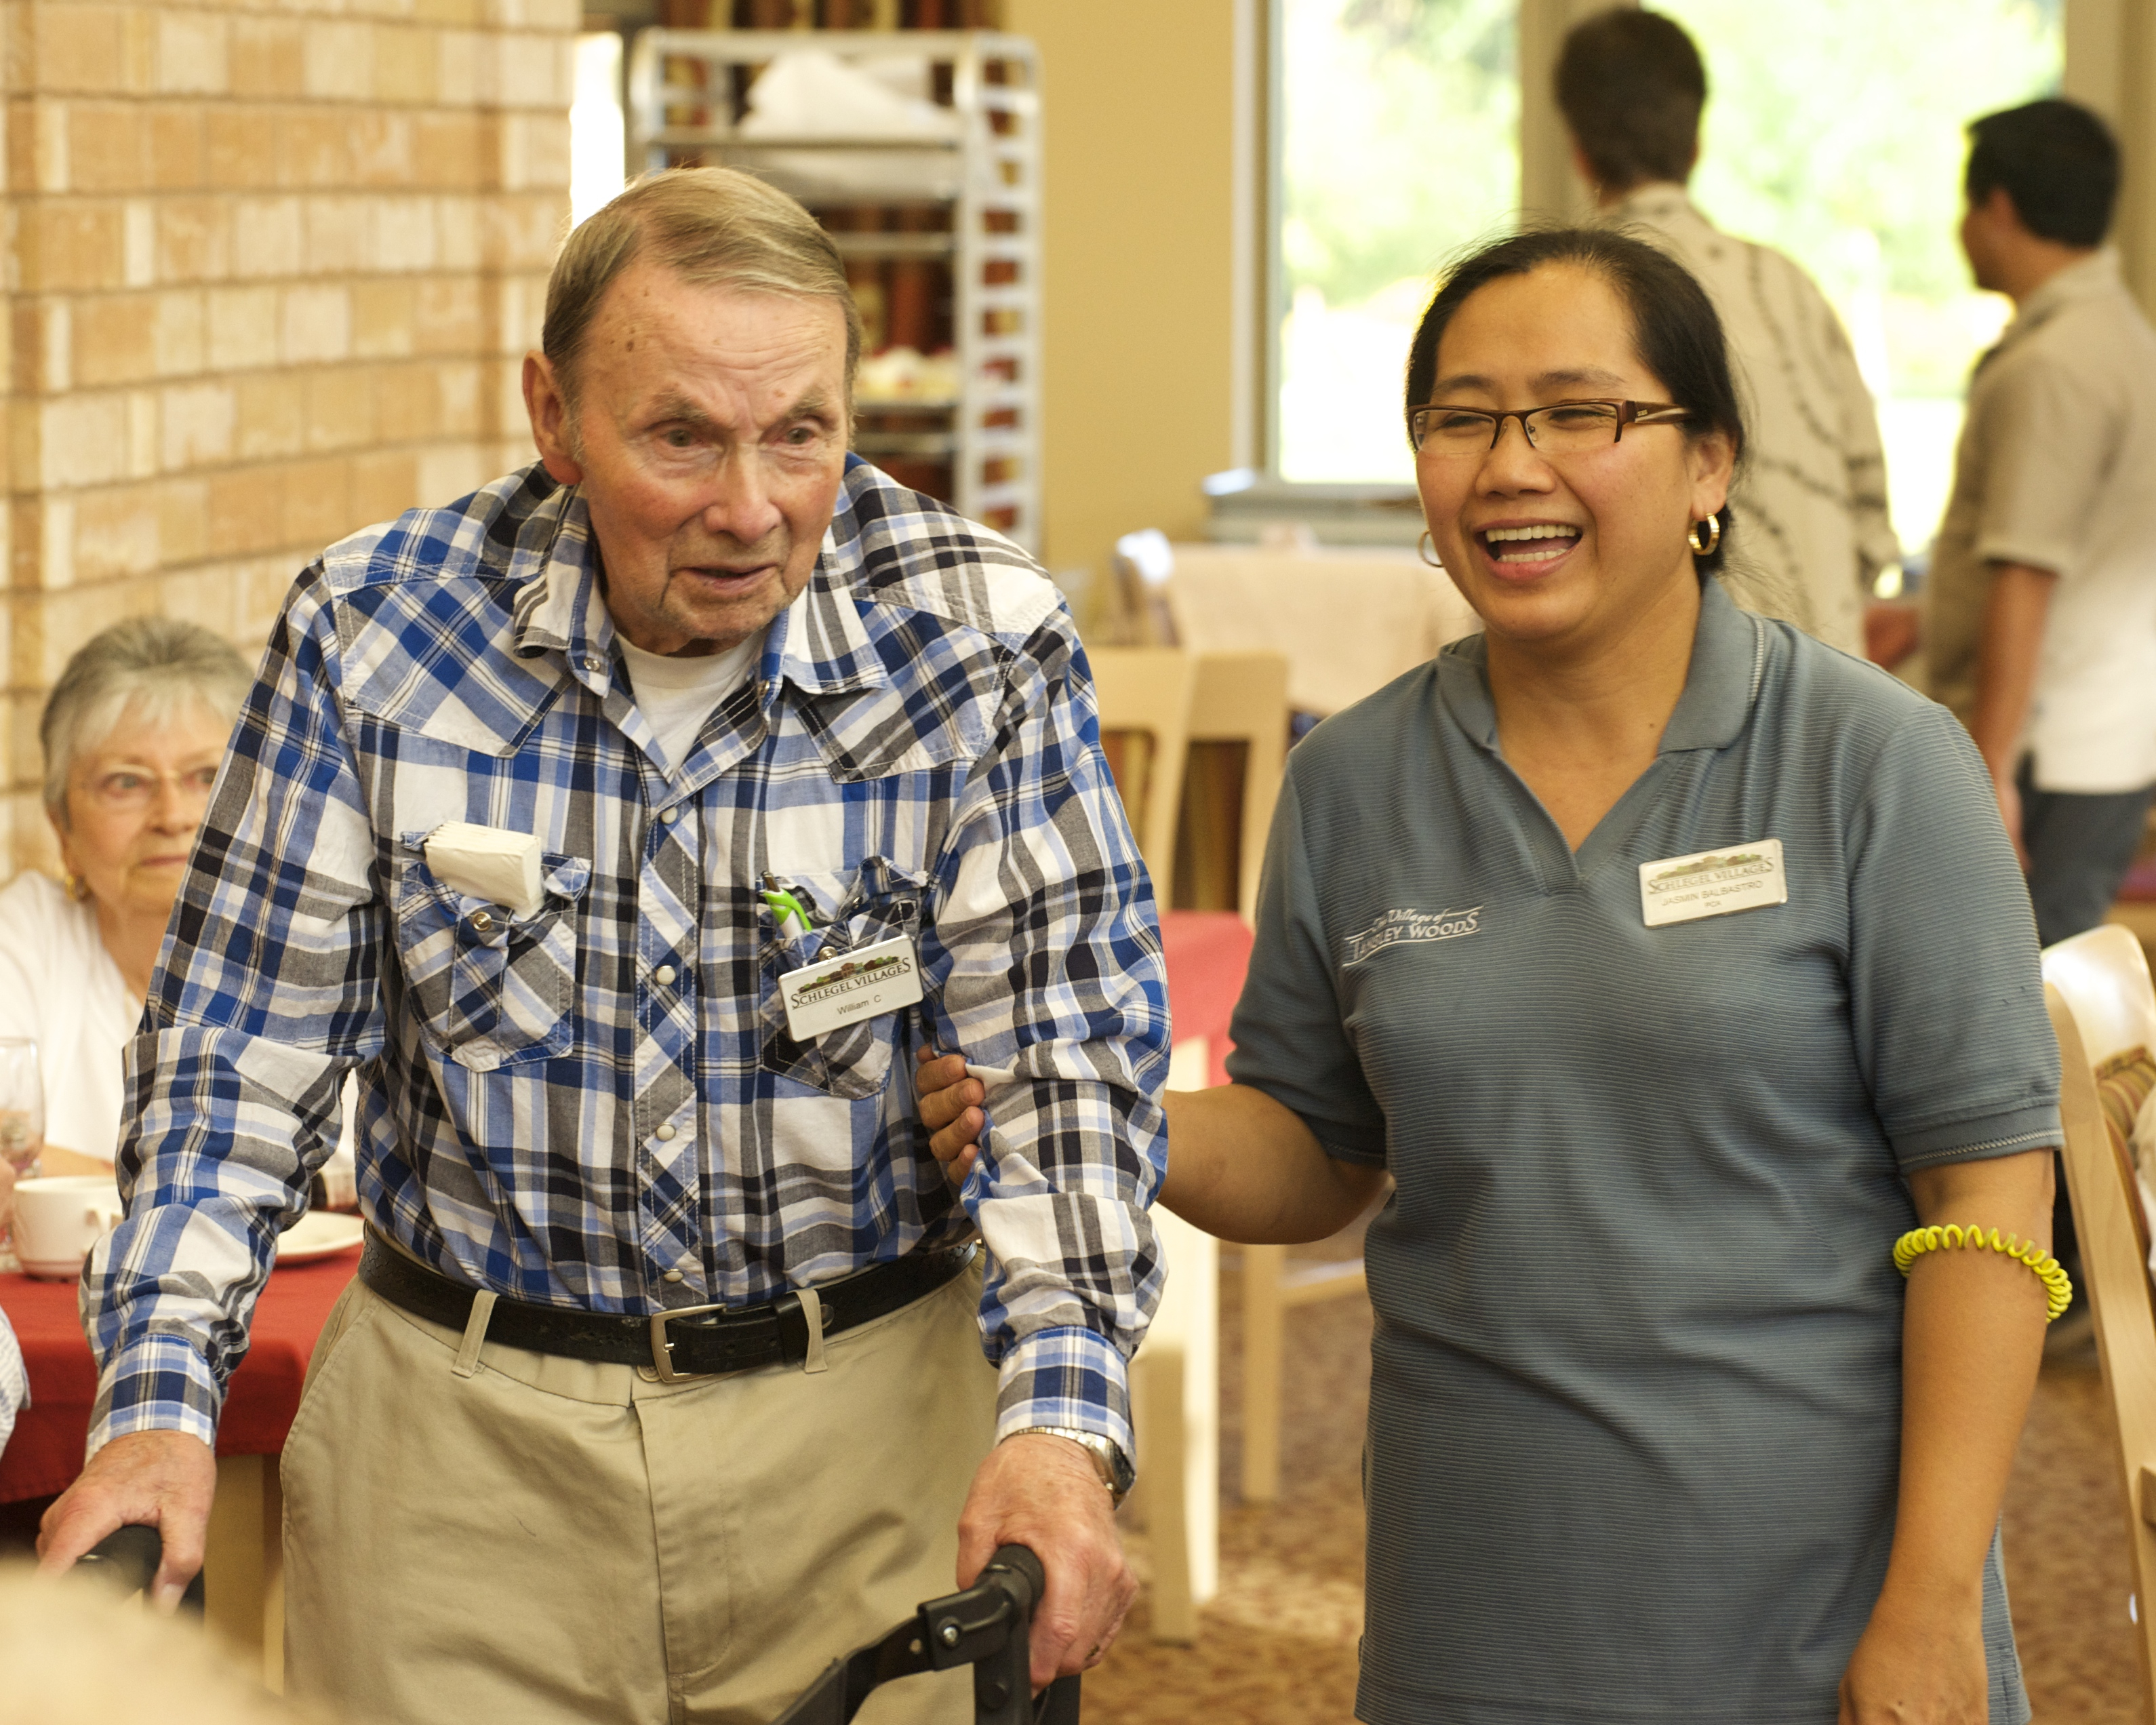 The expanding LTC sector in Ontario requires quality care partners to meet the growing need. Schlegel Villages is  proud to help train them in Living Classrooms at Riverside Glen, University Gates and Wentworth Heights. 